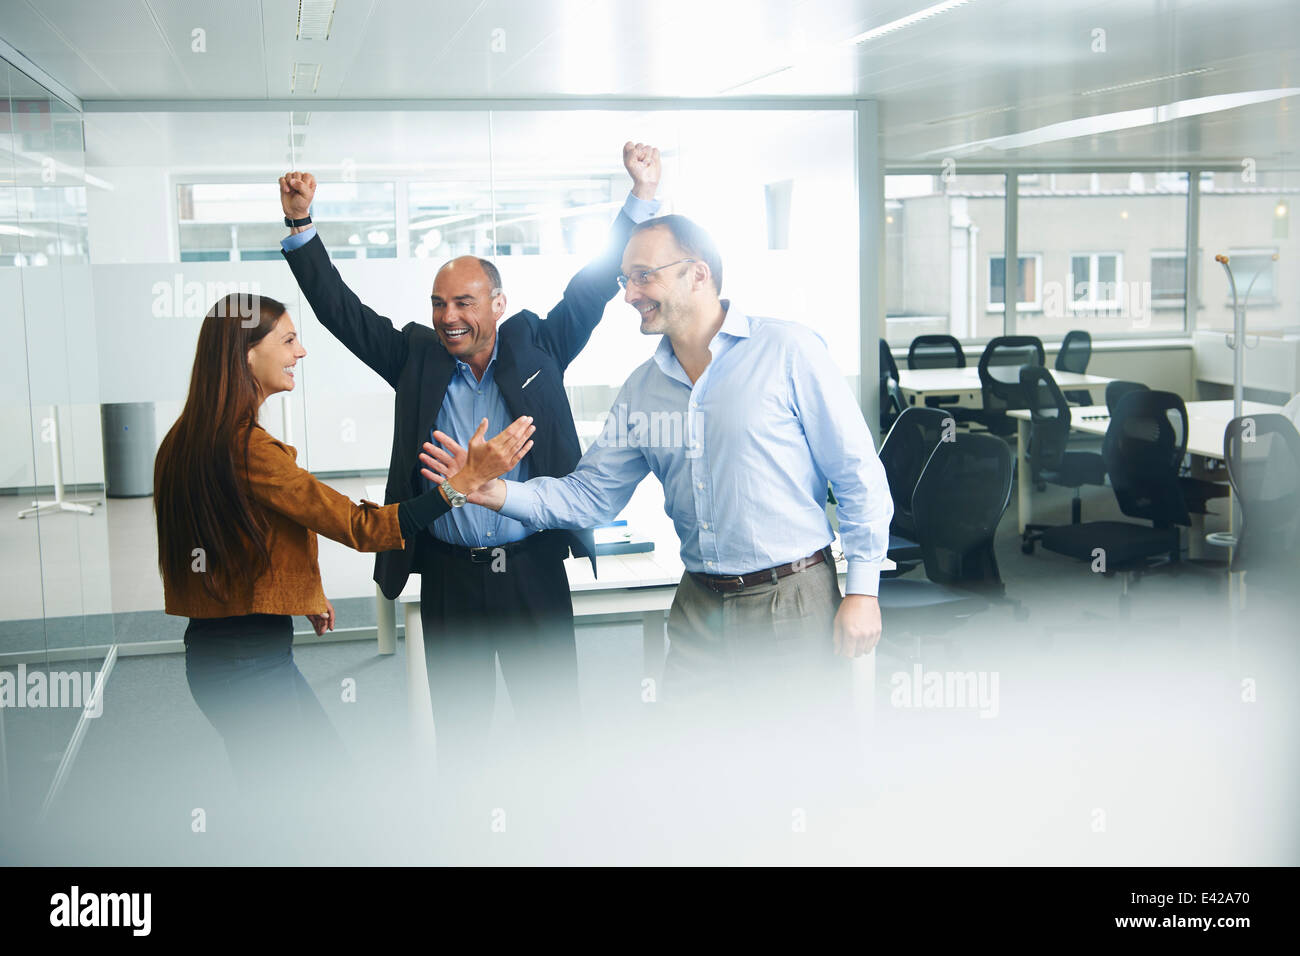 Businesspeople cheering in office Banque D'Images